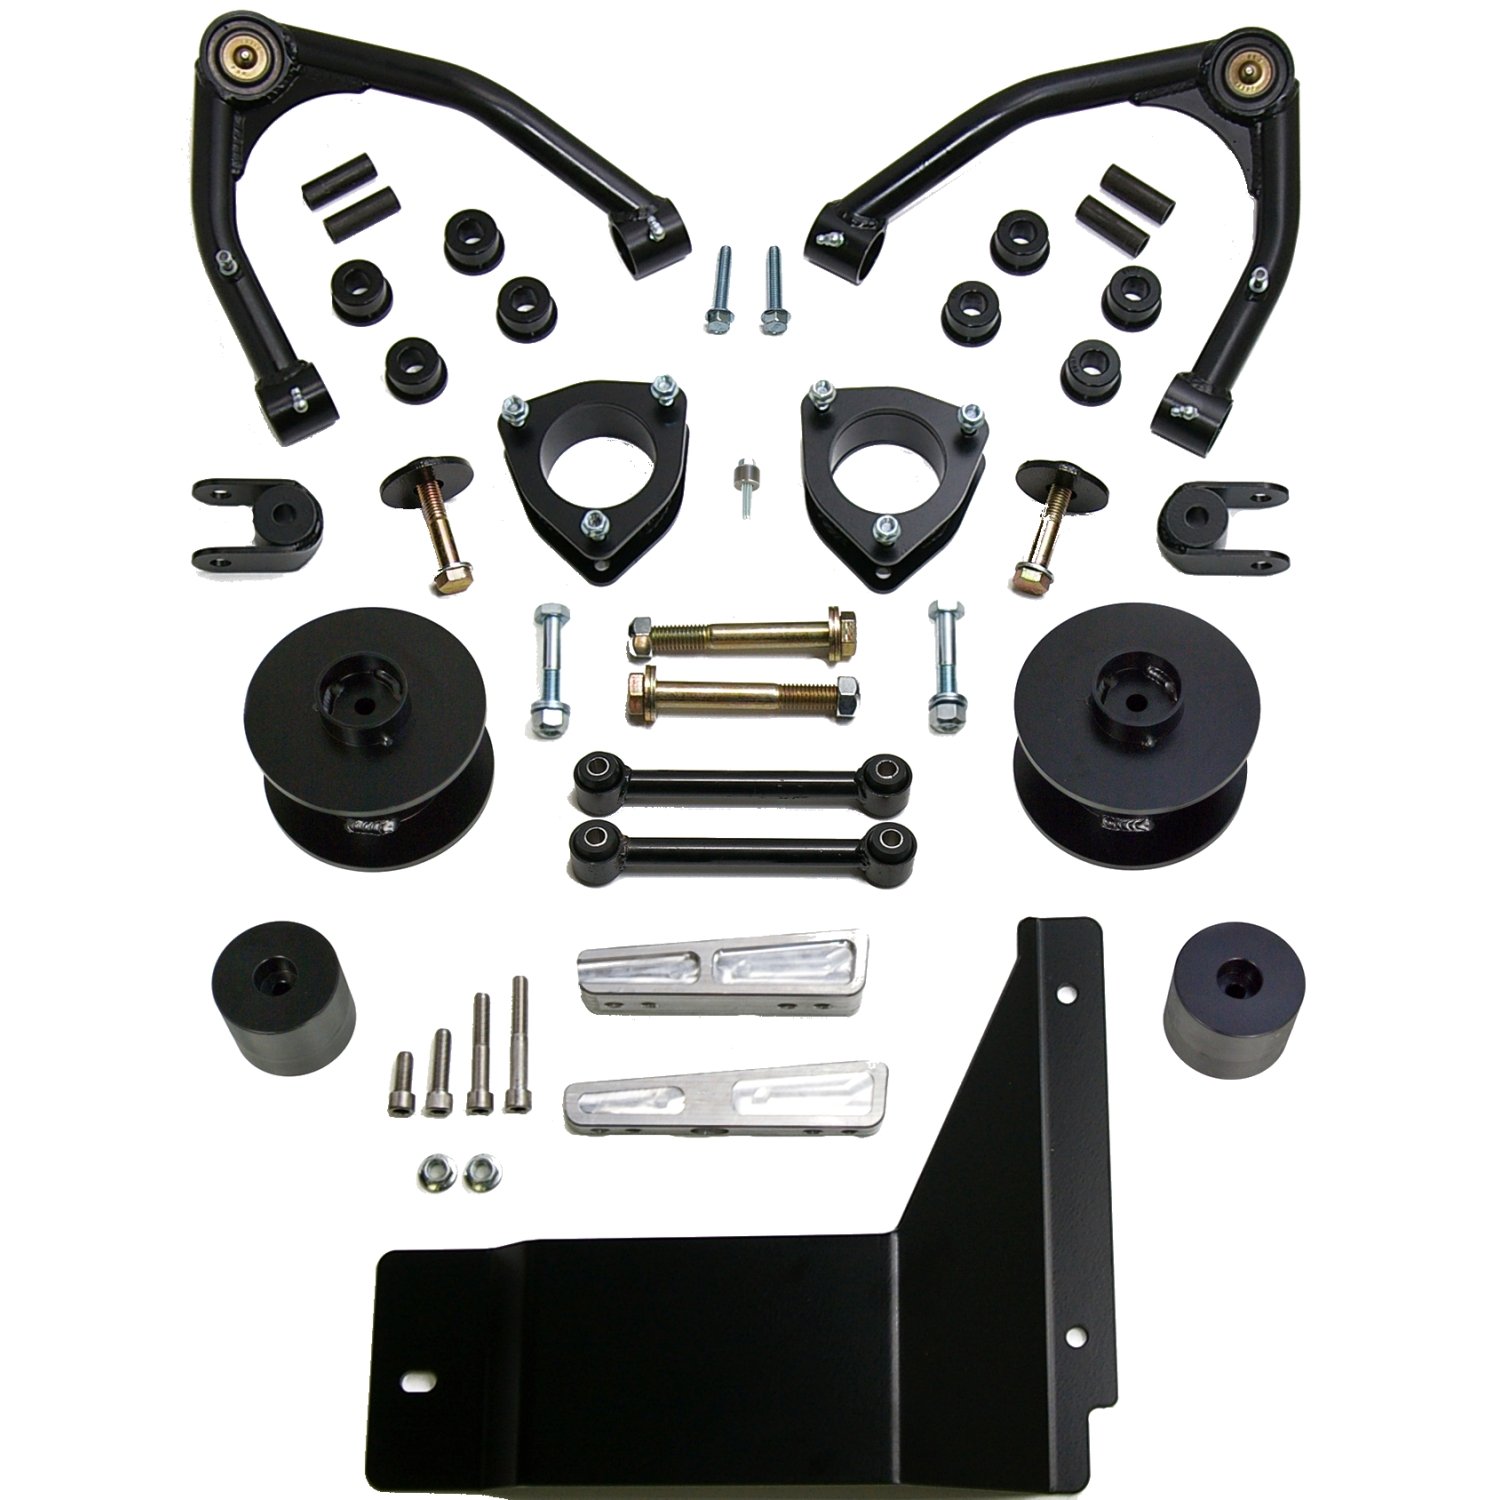 4IN SST LIFT KIT W/3IN REAR SPACER UPPER CONTROL ARMS  W/O SHOCKS 0714 CHEVY/GMC TAHOE 4WD